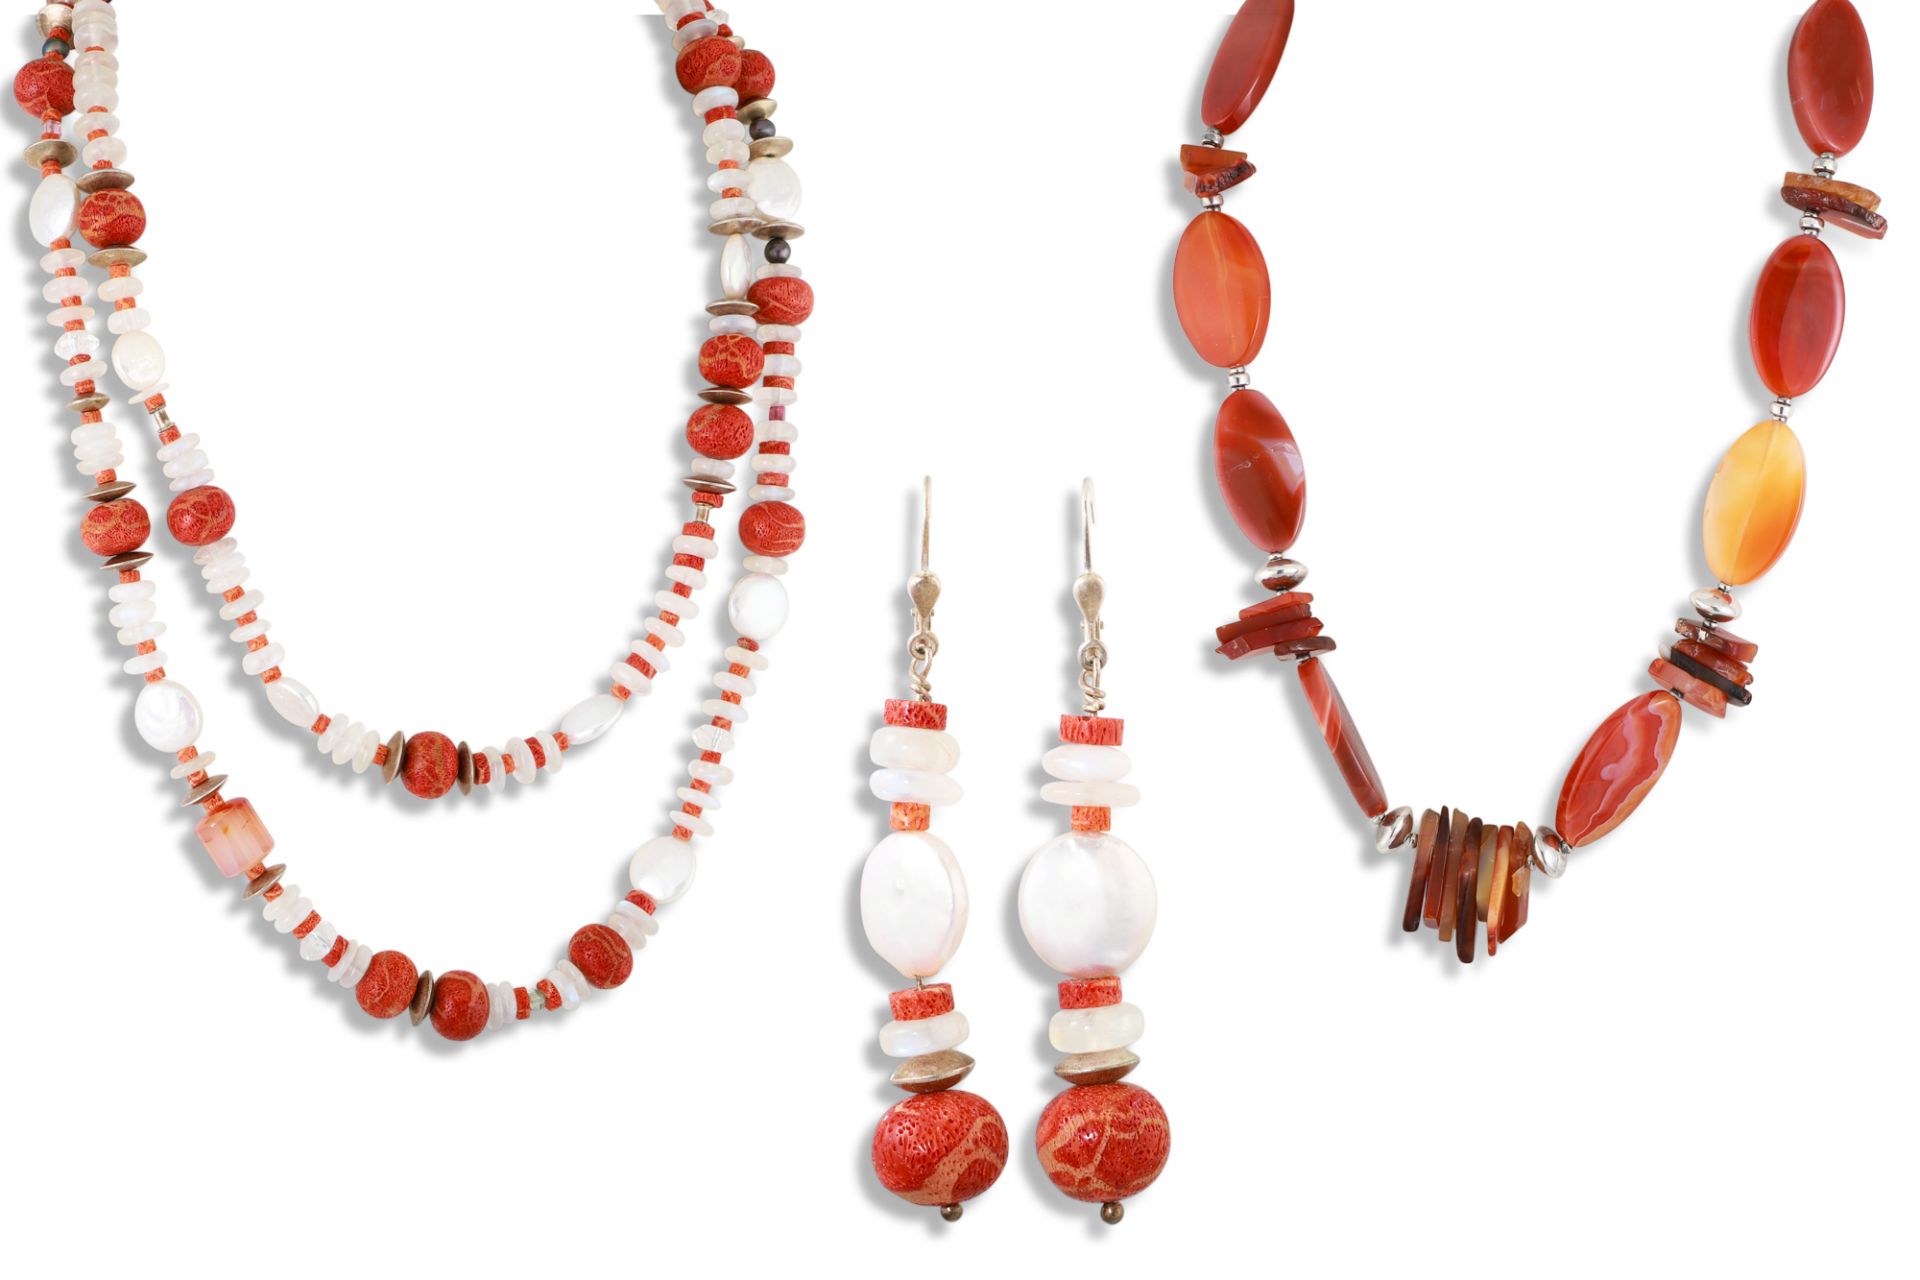 LINDA UHLEMANN (Irish Contemporary) two handmade necklaces, one with polished quartz of oval and